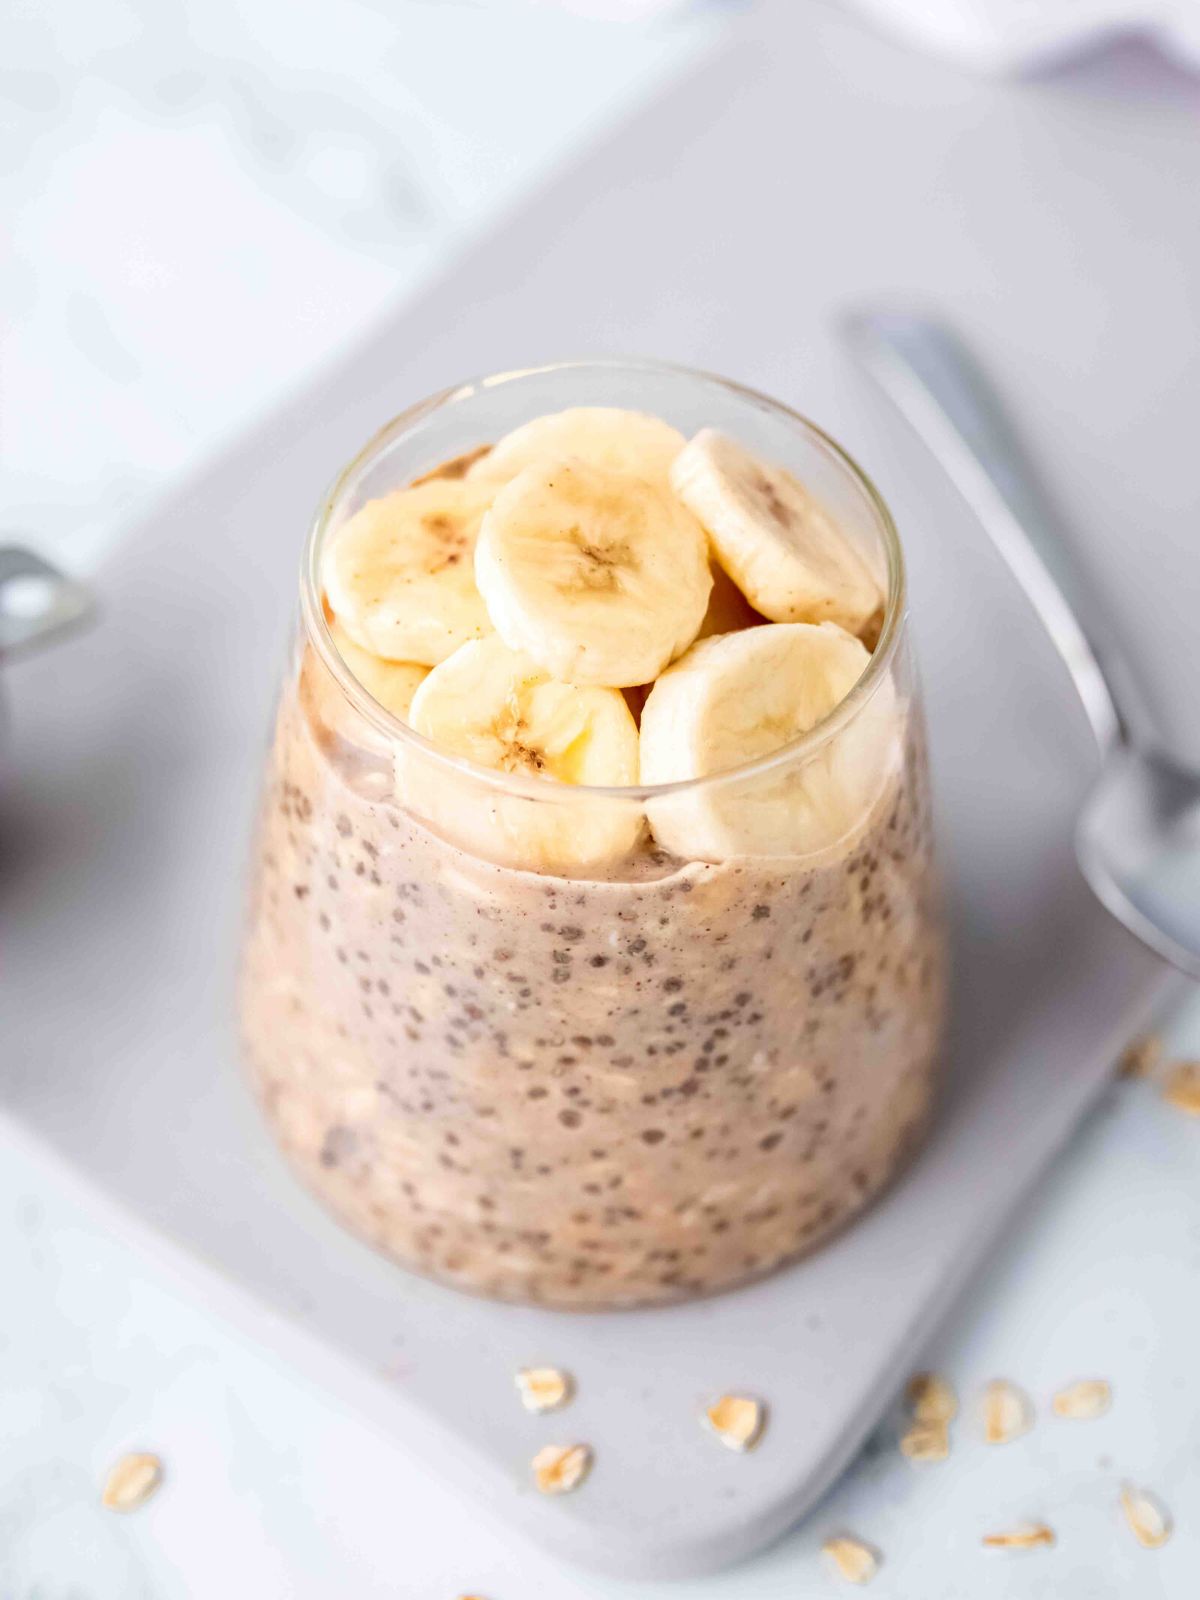 45 degree angle shot of a glass of protein overnight oats topped with banana on a rectangular grey plate with a silver spoon.